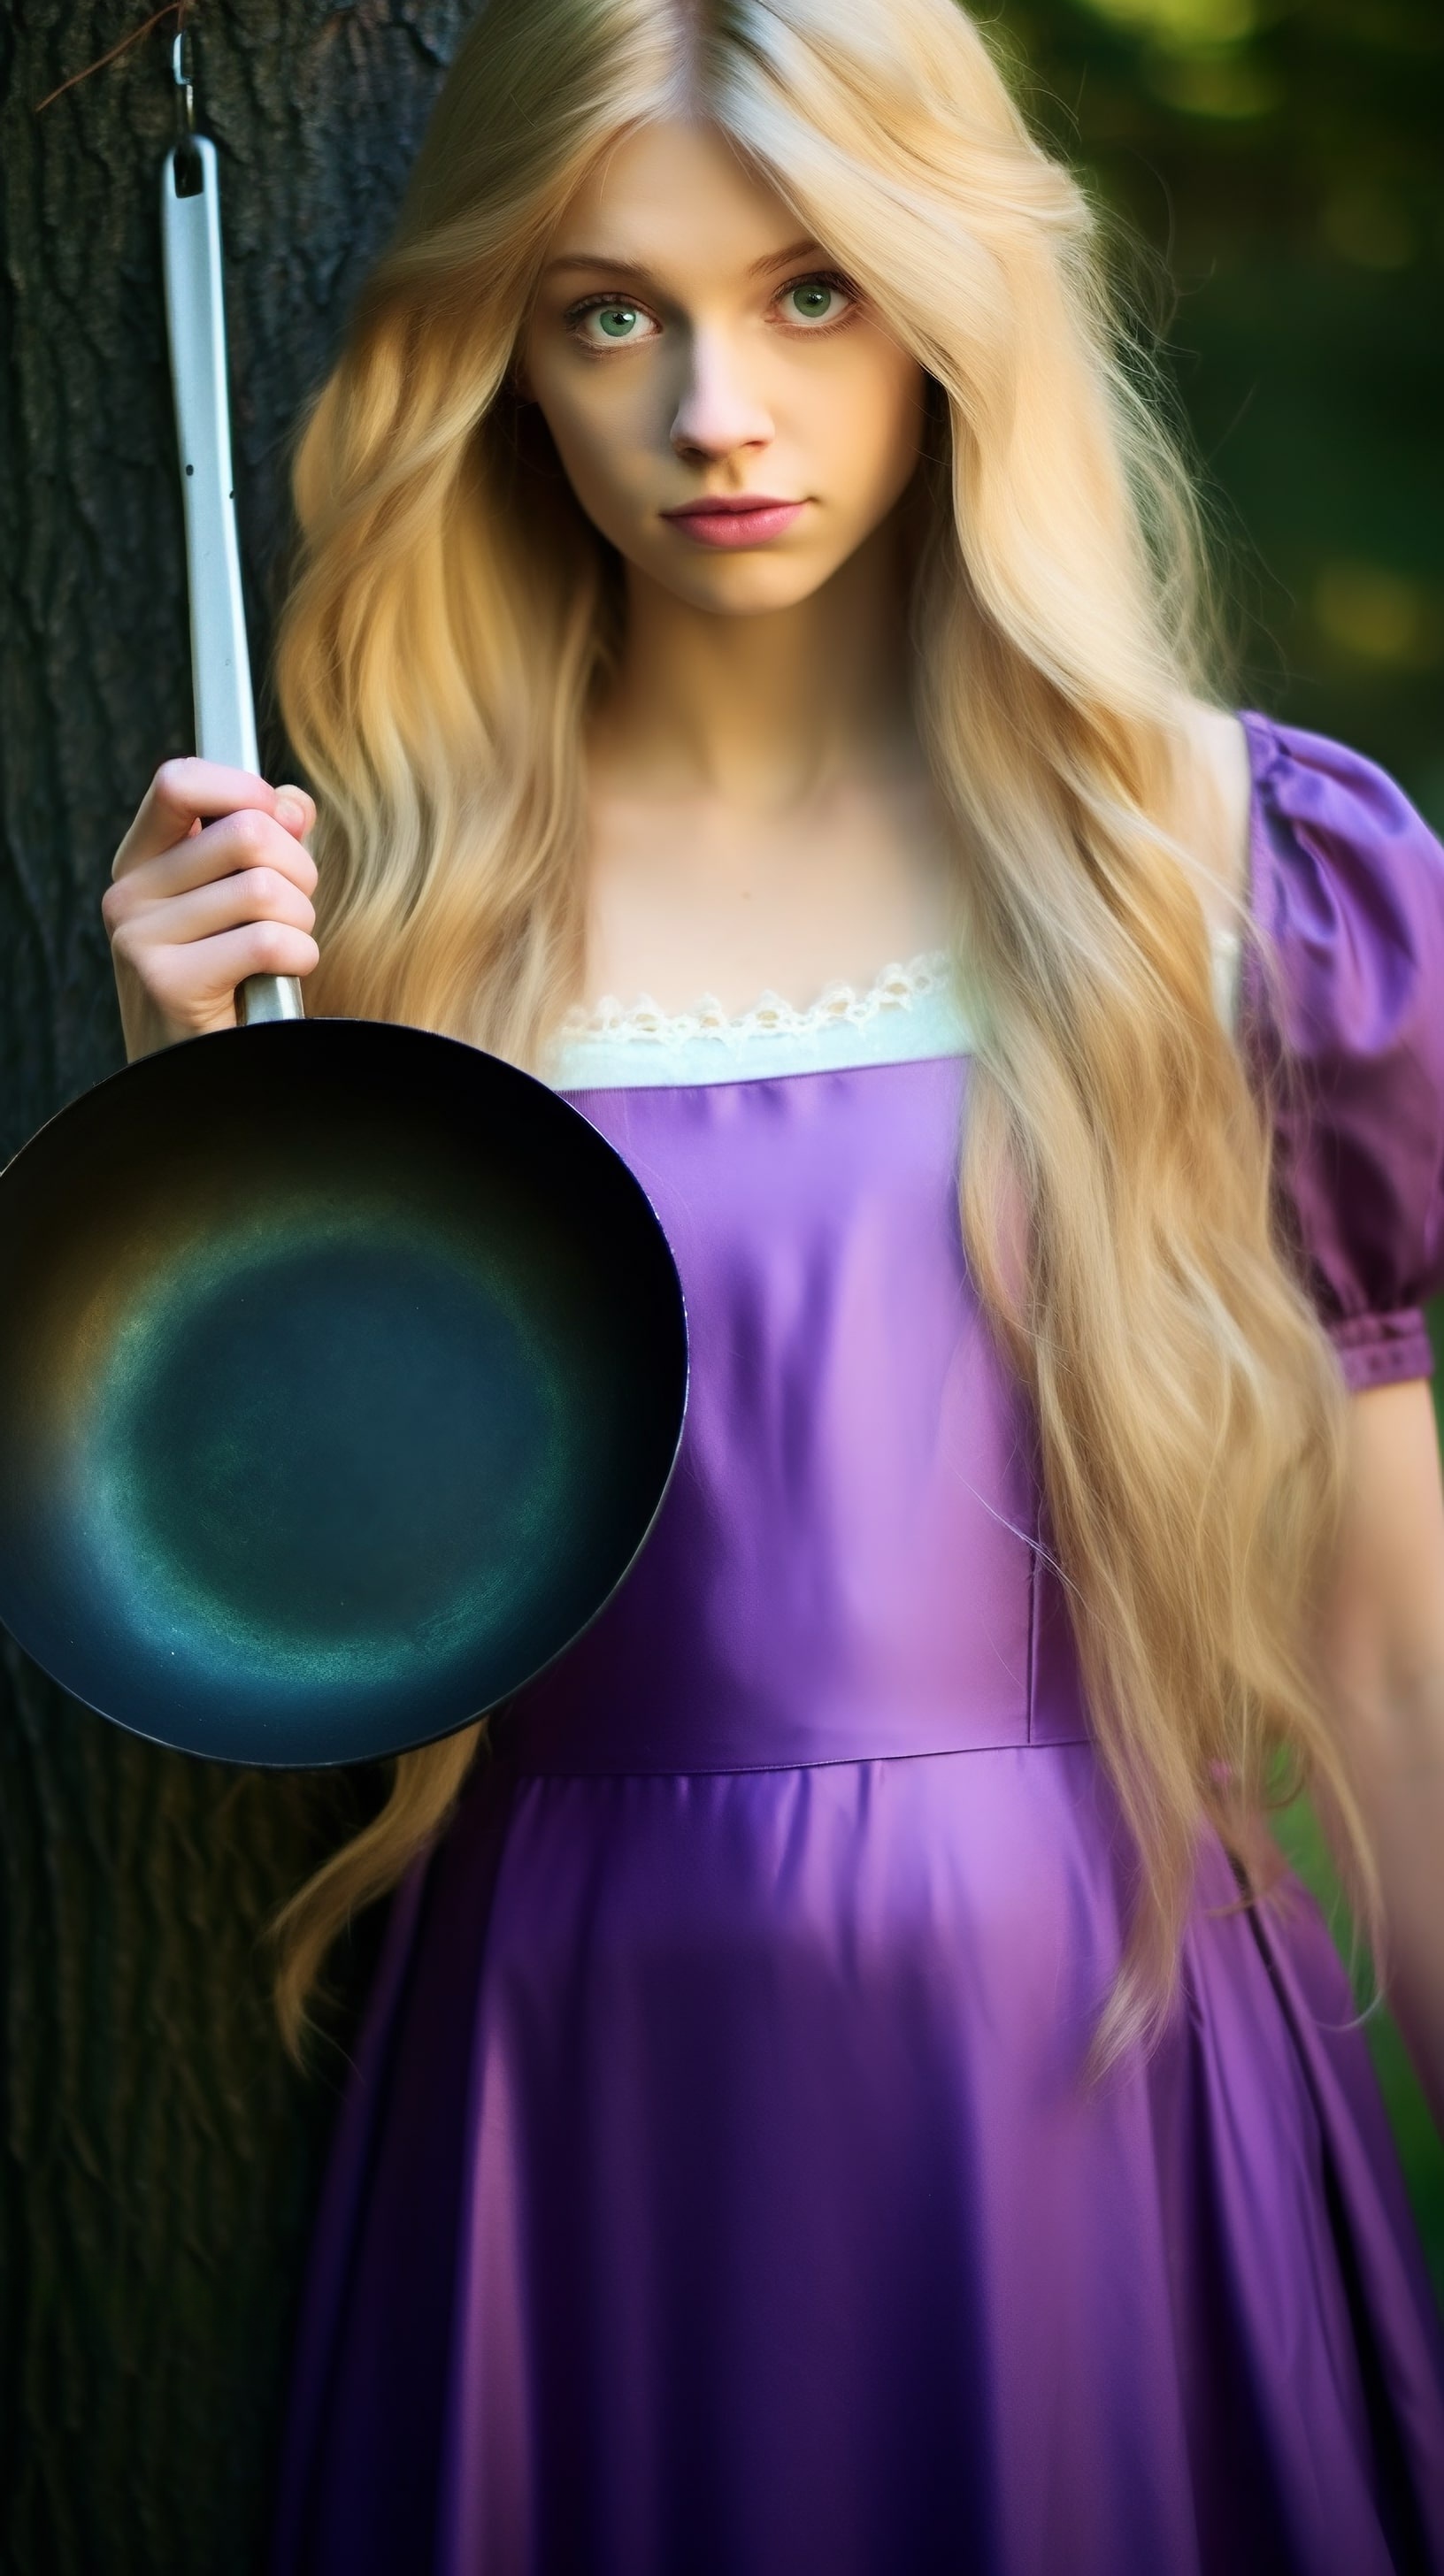 A girl in a purple dress holds a long frying pan in her hands